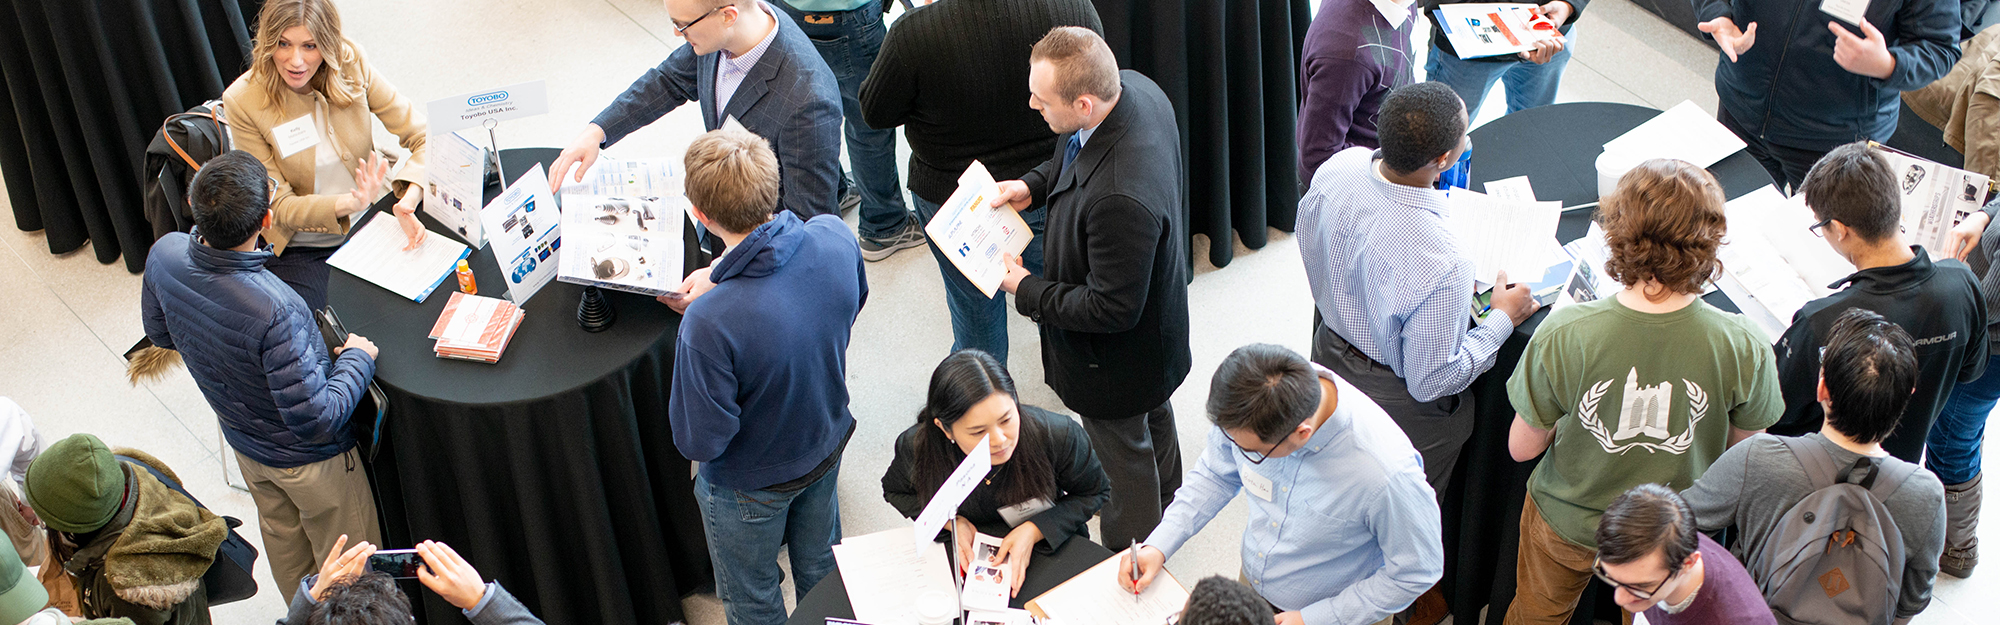 aerial photo of people standing around circular tables, looking over papers